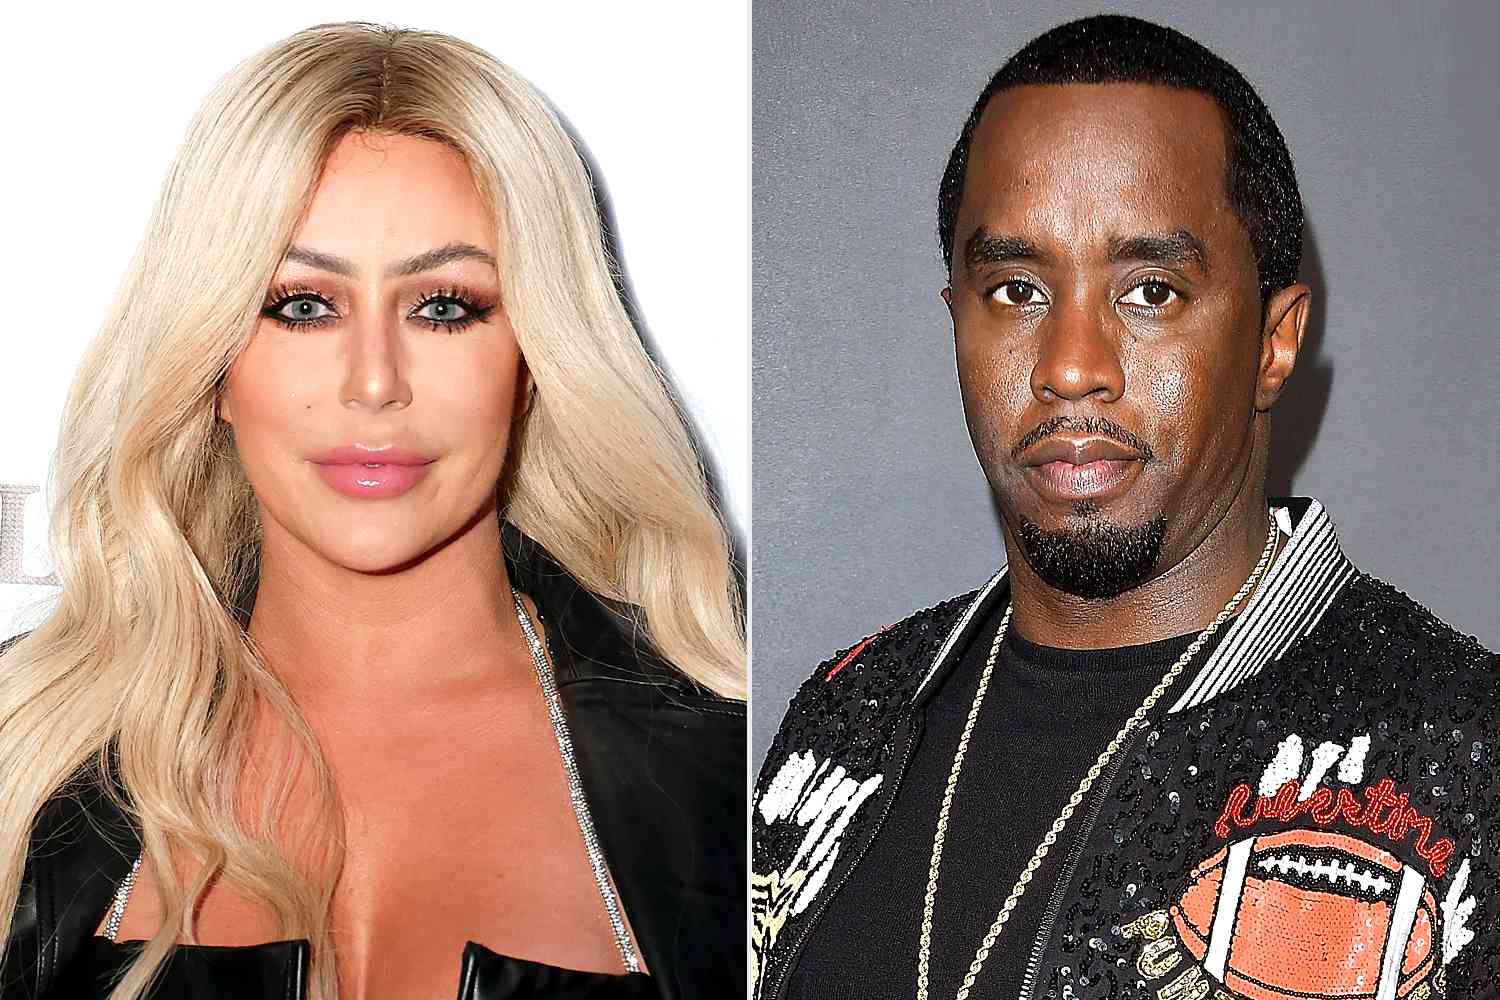 Aubrey O'Day Says the 'Picture Is Getting a Lot More Clear' with Diddy After 2016 Cassie Assault Video Surfaces